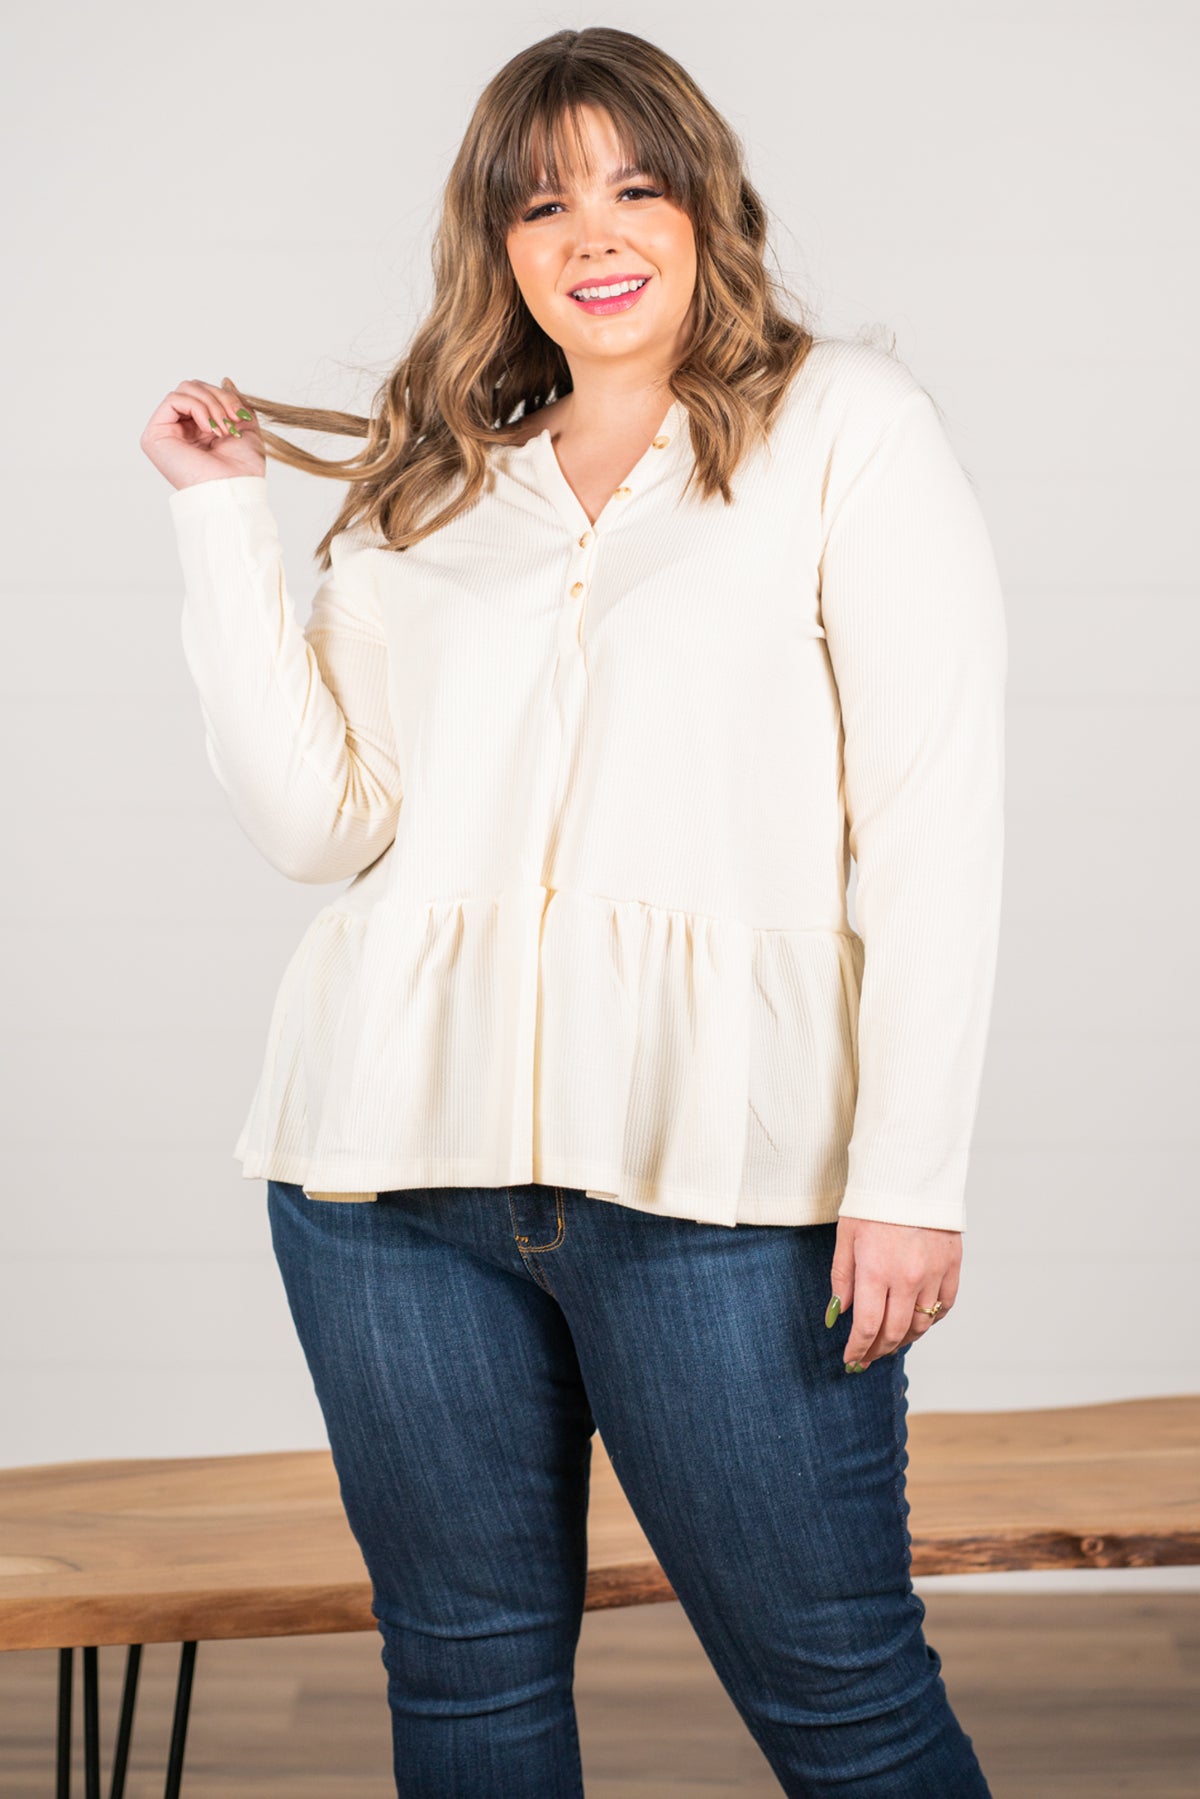 Blu Pepper Color: Ivory Ribbed Knit Long Sleeves Henley Neckline 94% POLYESTER 6% SPANDEX Style #: PCR1253 Contact us for any additional measurements or sizing. 